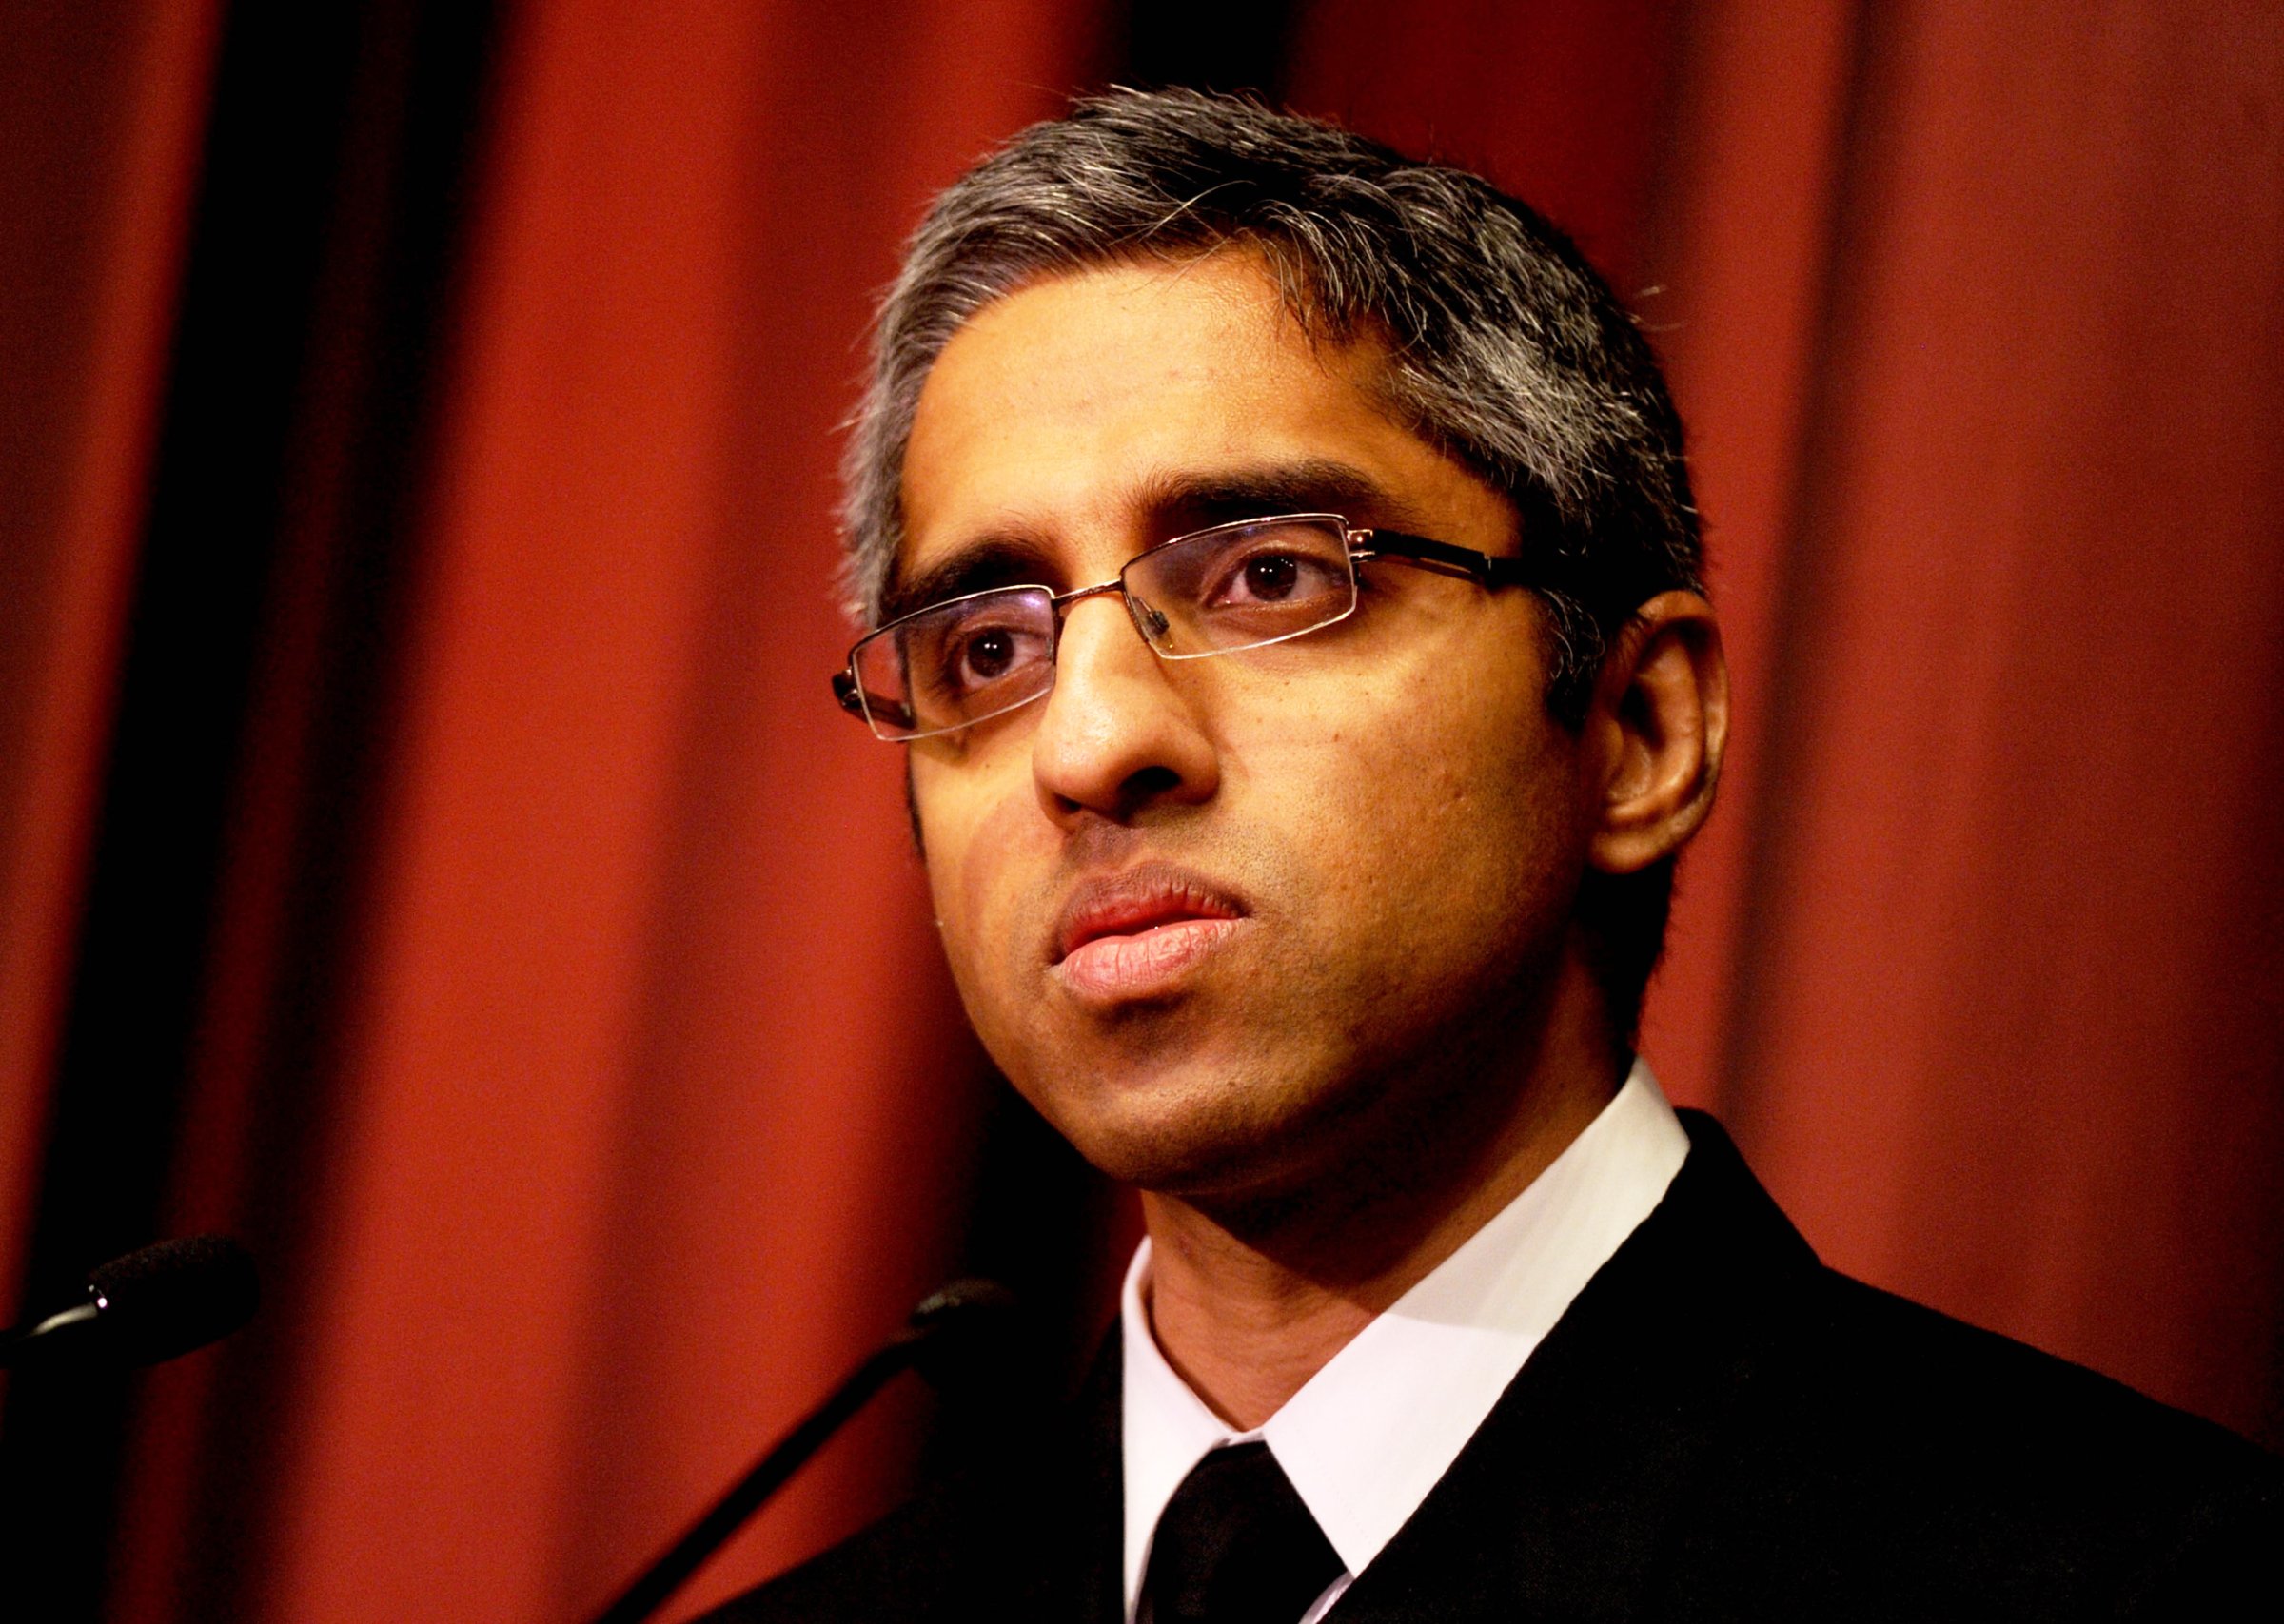 U.S. Surgeon General Dr. Vivek Murthy at The National Action Network Conference on April 14, 2016.